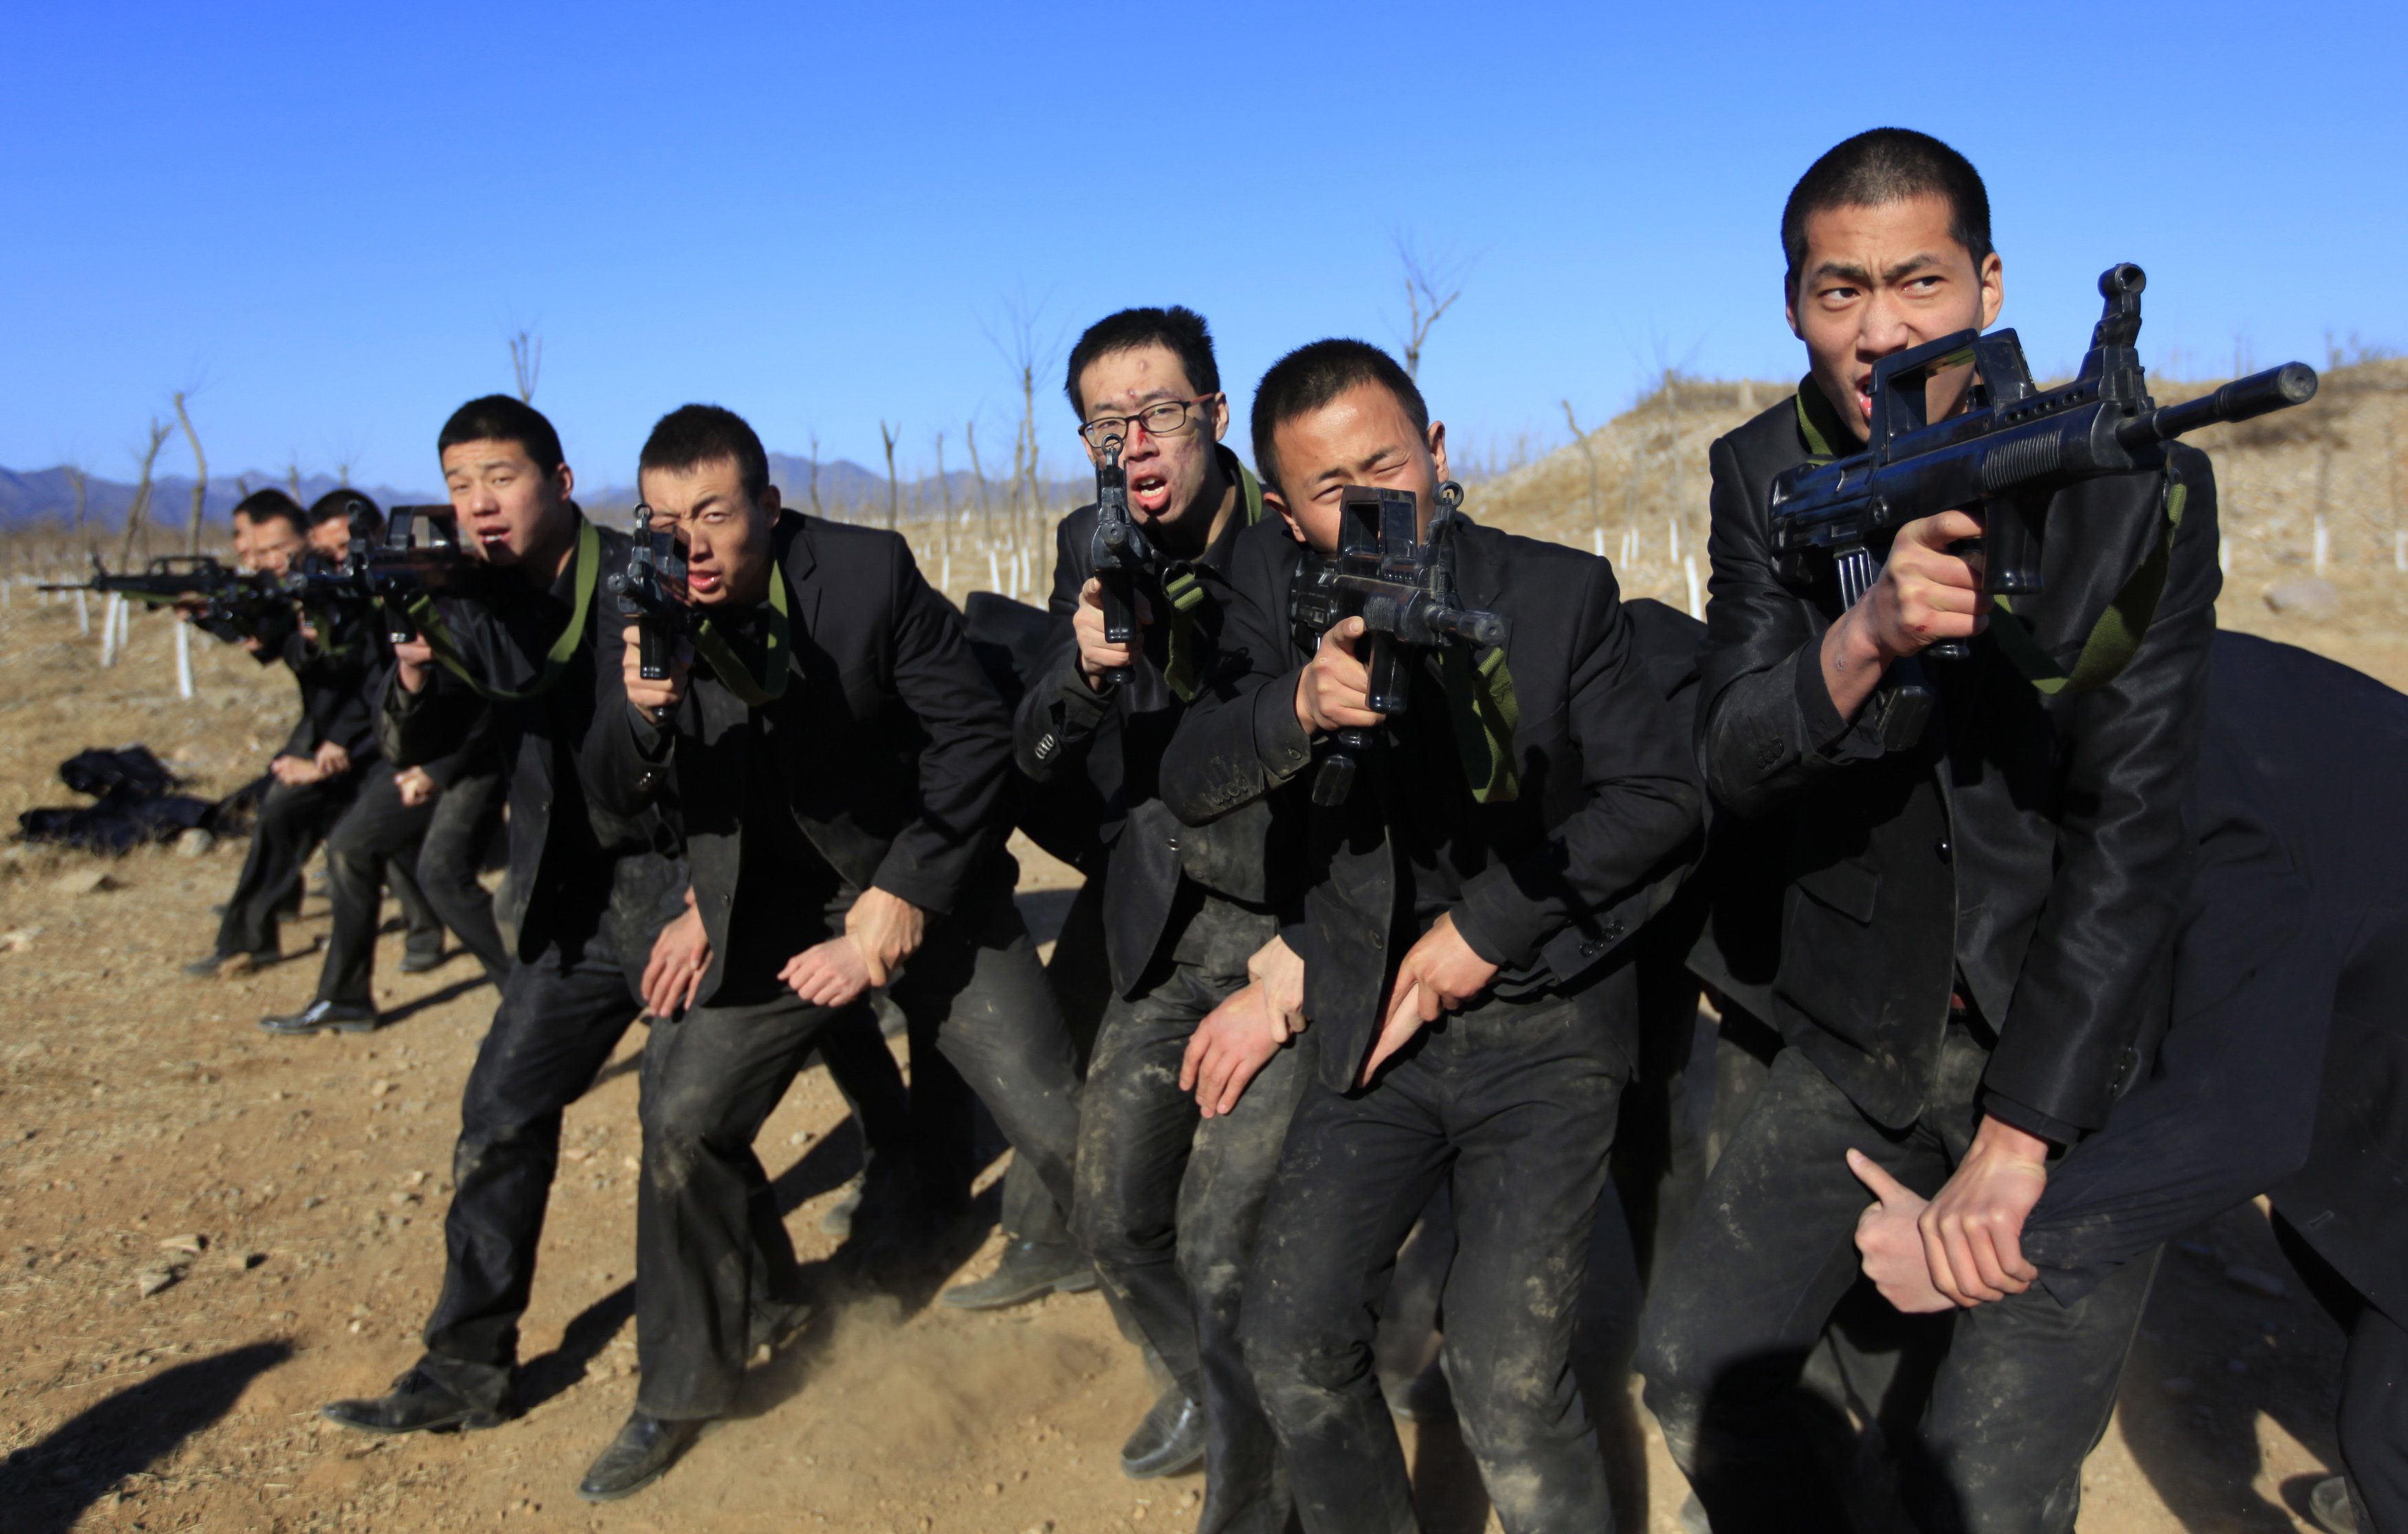 Students holding replica 95 semi-automatic rifles practice protecting their employers at a shooting training field managed by the military during Tianjiao Special Guard Security Consultant training on the outskirts of Beijing December 14, 2013.